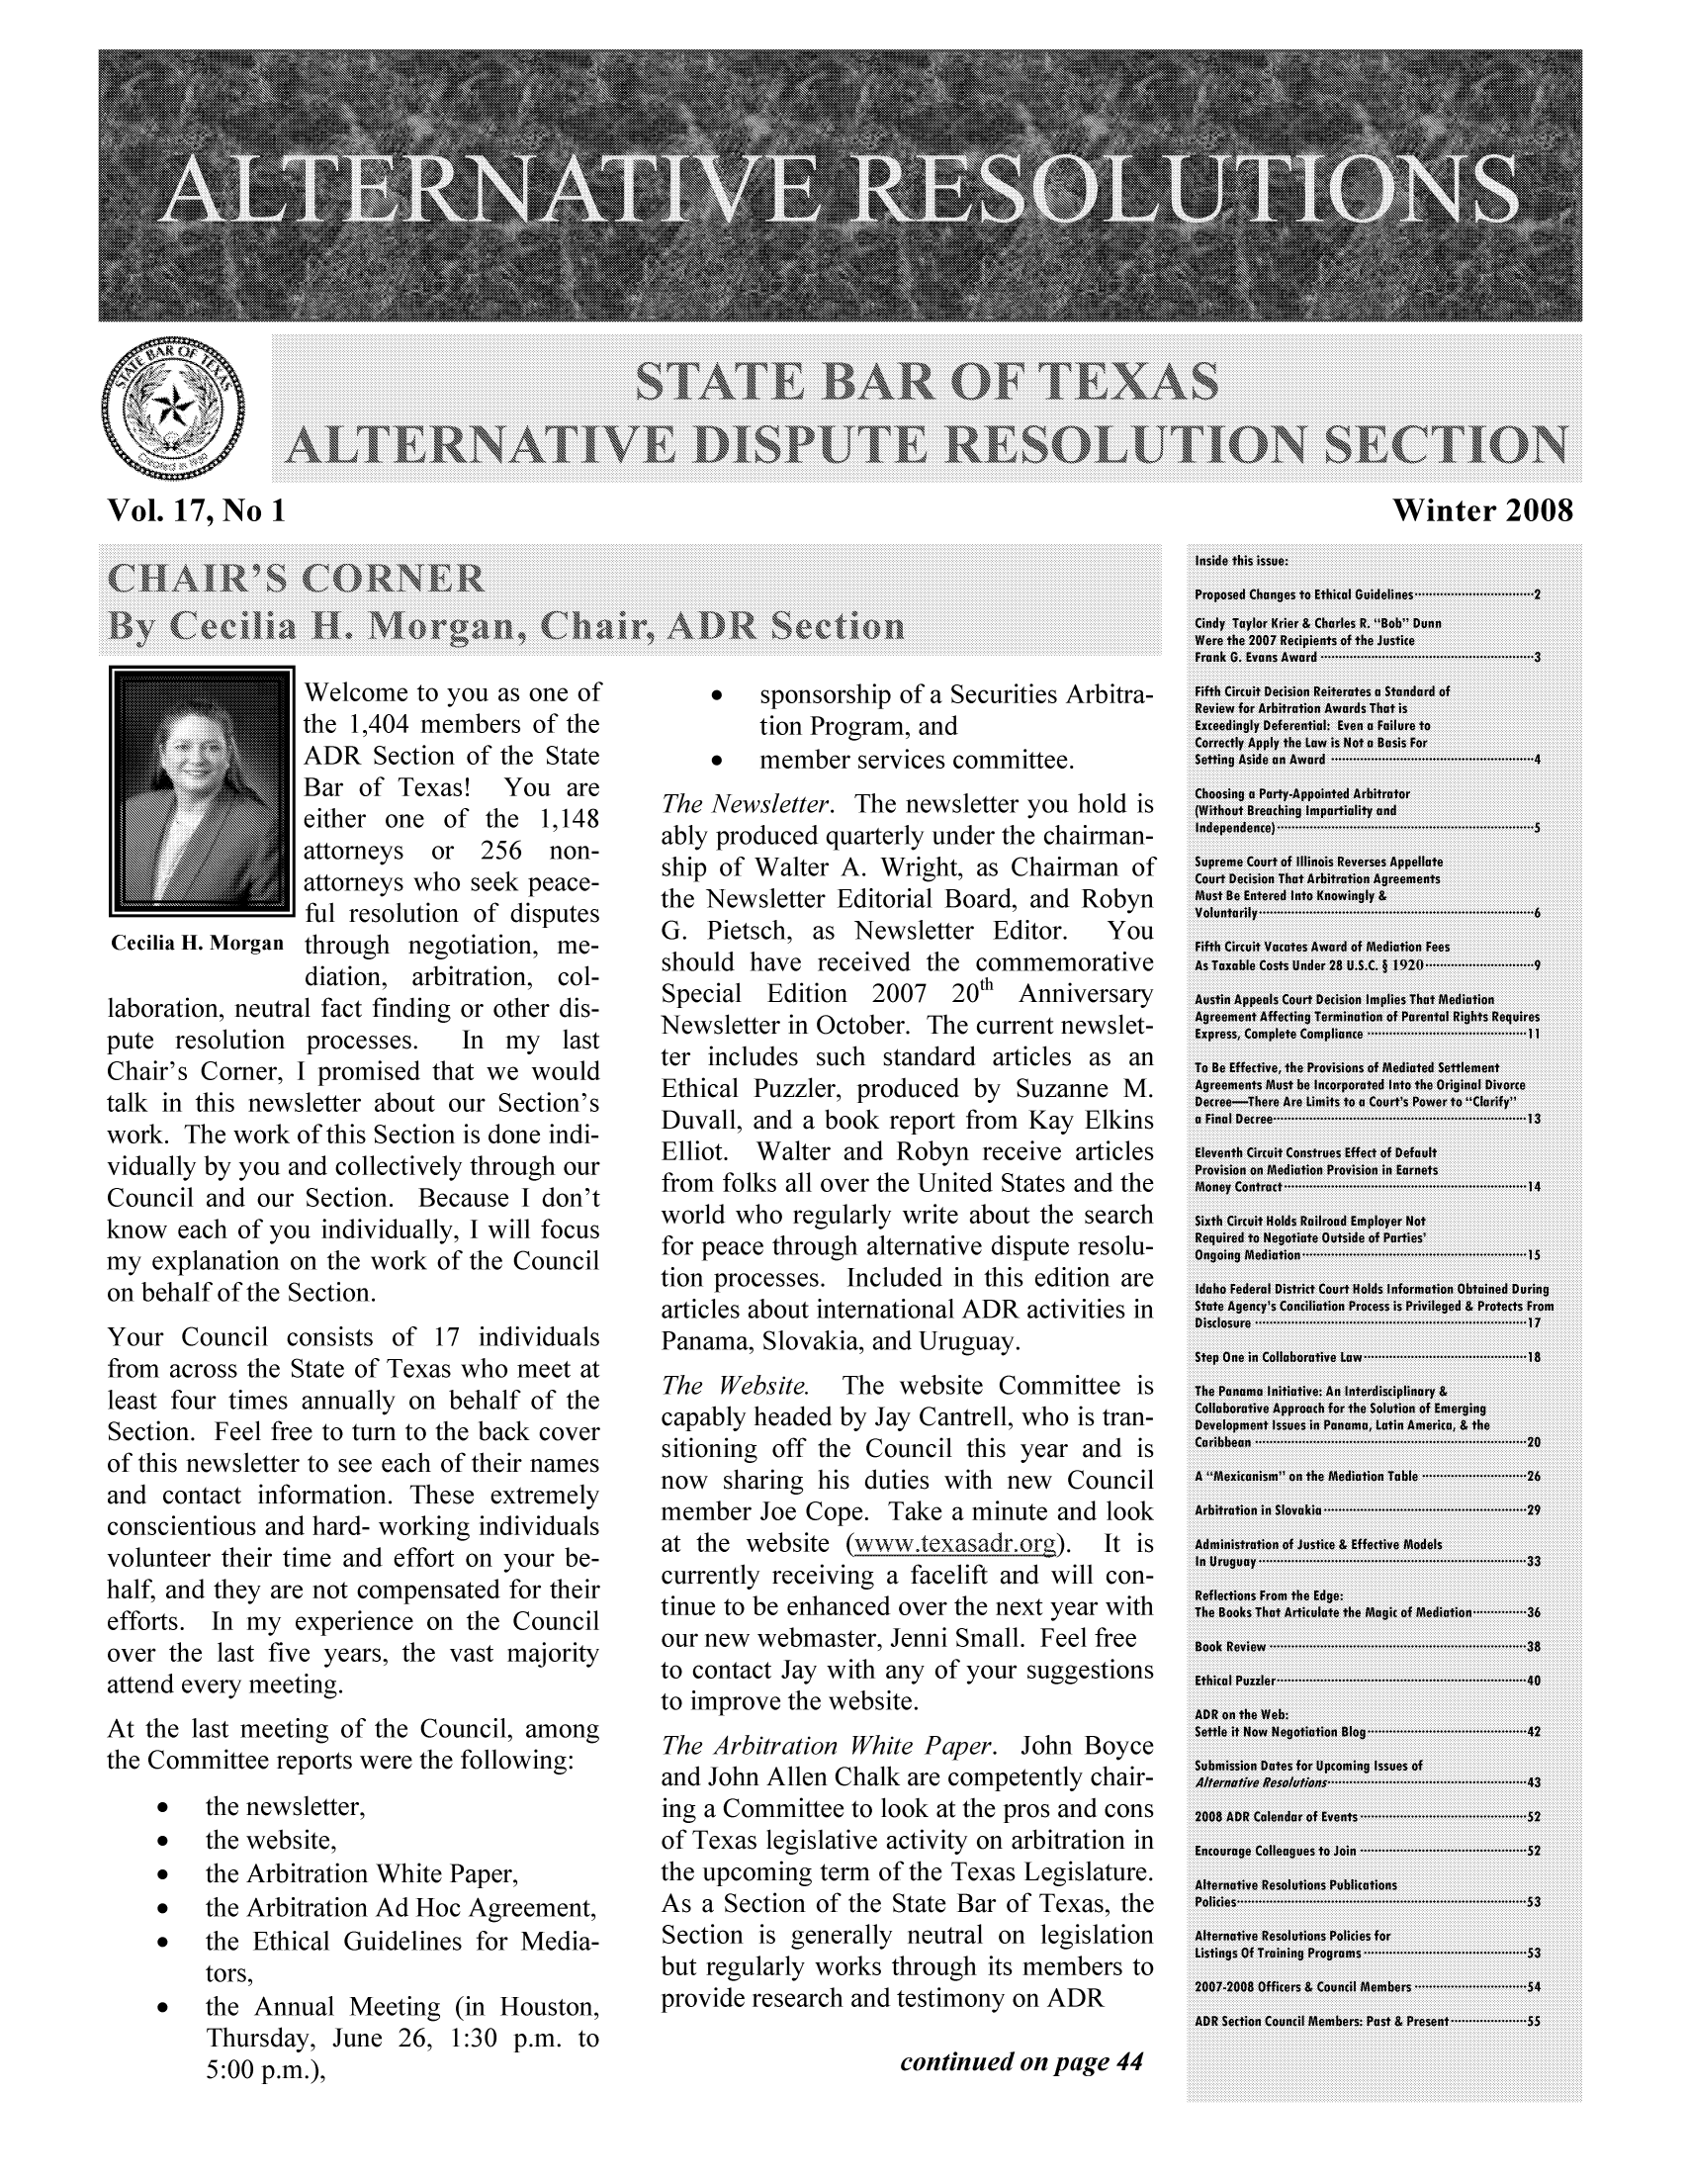 handle is hein.barjournals/altresolut0017 and id is 1 raw text is: Vol. 17, No 1

Welcome to you as one of
the 1,404 members of the
ADR Section of the State
Bar of Texas! You are
either one of the 1,148
attorneys  or 256  non-
attorneys who seek peace-
ful resolution of disputes
Cecilia H. Morgan through negotiation, me-
diation, arbitration, col-
laboration, neutral fact finding or other dis-
pute resolution processes.  In my last
Chair's Comer, I promised that we would
talk in this newsletter about our Section's
work. The work of this Section is done indi-
vidually by you and collectively through our
Council and our Section. Because I don't
know each of you individually, I will focus
my explanation on the work of the Council
on behalf of the Section.
Your Council consists of 17 individuals
from across the State of Texas who meet at
least four times annually on behalf of the
Section. Feel free to turn to the back cover
of this newsletter to see each of their names
and contact information. These extremely
conscientious and hard- working individuals
volunteer their time and effort on your be-
half, and they are not compensated for their
efforts. In my experience on the Council
over the last five years, the vast majority
attend every meeting.
At the last meeting of the Council, among
the Committee reports were the following:
*   the newsletter,
*   the website,
*   the Arbitration White Paper,
*   the Arbitration Ad Hoc Agreement,
*   the Ethical Guidelines for Media-
tors,
*   the Annual Meeting (in Houston,
Thursday, June 26, 1:30 p.m. to
5:00 p.m.),

*   sponsorship of a Securities Arbitra-
tion Program, and
*   member services committee.
The Newsletter. The newsletter you hold is
ably produced quarterly under the chairman-
ship of Walter A. Wright, as Chairman of
the Newsletter Editorial Board, and Robyn
G. Pietsch, as Newsletter Editor.  You
should have received the commemorative
Special Edition  2007  20th Anniversary
Newsletter in October. The current newslet-
ter includes such standard articles as an
Ethical Puzzler, produced by Suzanne M.
Duvall, and a book report from Kay Elkins
Elliot. Walter and Robyn receive articles
from folks all over the United States and the
world who regularly write about the search
for peace through alternative dispute resolu-
tion processes. Included in this edition are
articles about international ADR activities in
Panama, Slovakia, and Uruguay.
The Website. The website Committee is
capably headed by Jay Cantrell, who is tran-
sitioning off the Council this year and is
now sharing his duties with new Council
member Joe Cope. Take a minute and look
at the website (www.texasadr.org).  It is
currently receiving a facelift and will con-
tinue to be enhanced over the next year with
our new webmaster, Jenni Small. Feel free
to contact Jay with any of your suggestions
to improve the website.
The Arbitration White Paper. John Boyce
and John Allen Chalk are competently chair-
ing a Committee to look at the pros and cons
of Texas legislative activity on arbitration in
the upcoming term of the Texas Legislature.
As a Section of the State Bar of Texas, the
Section is generally neutral on legislation
but regularly works through its members to
provide research and testimony on ADR

continued on page 44

Winter 2008


